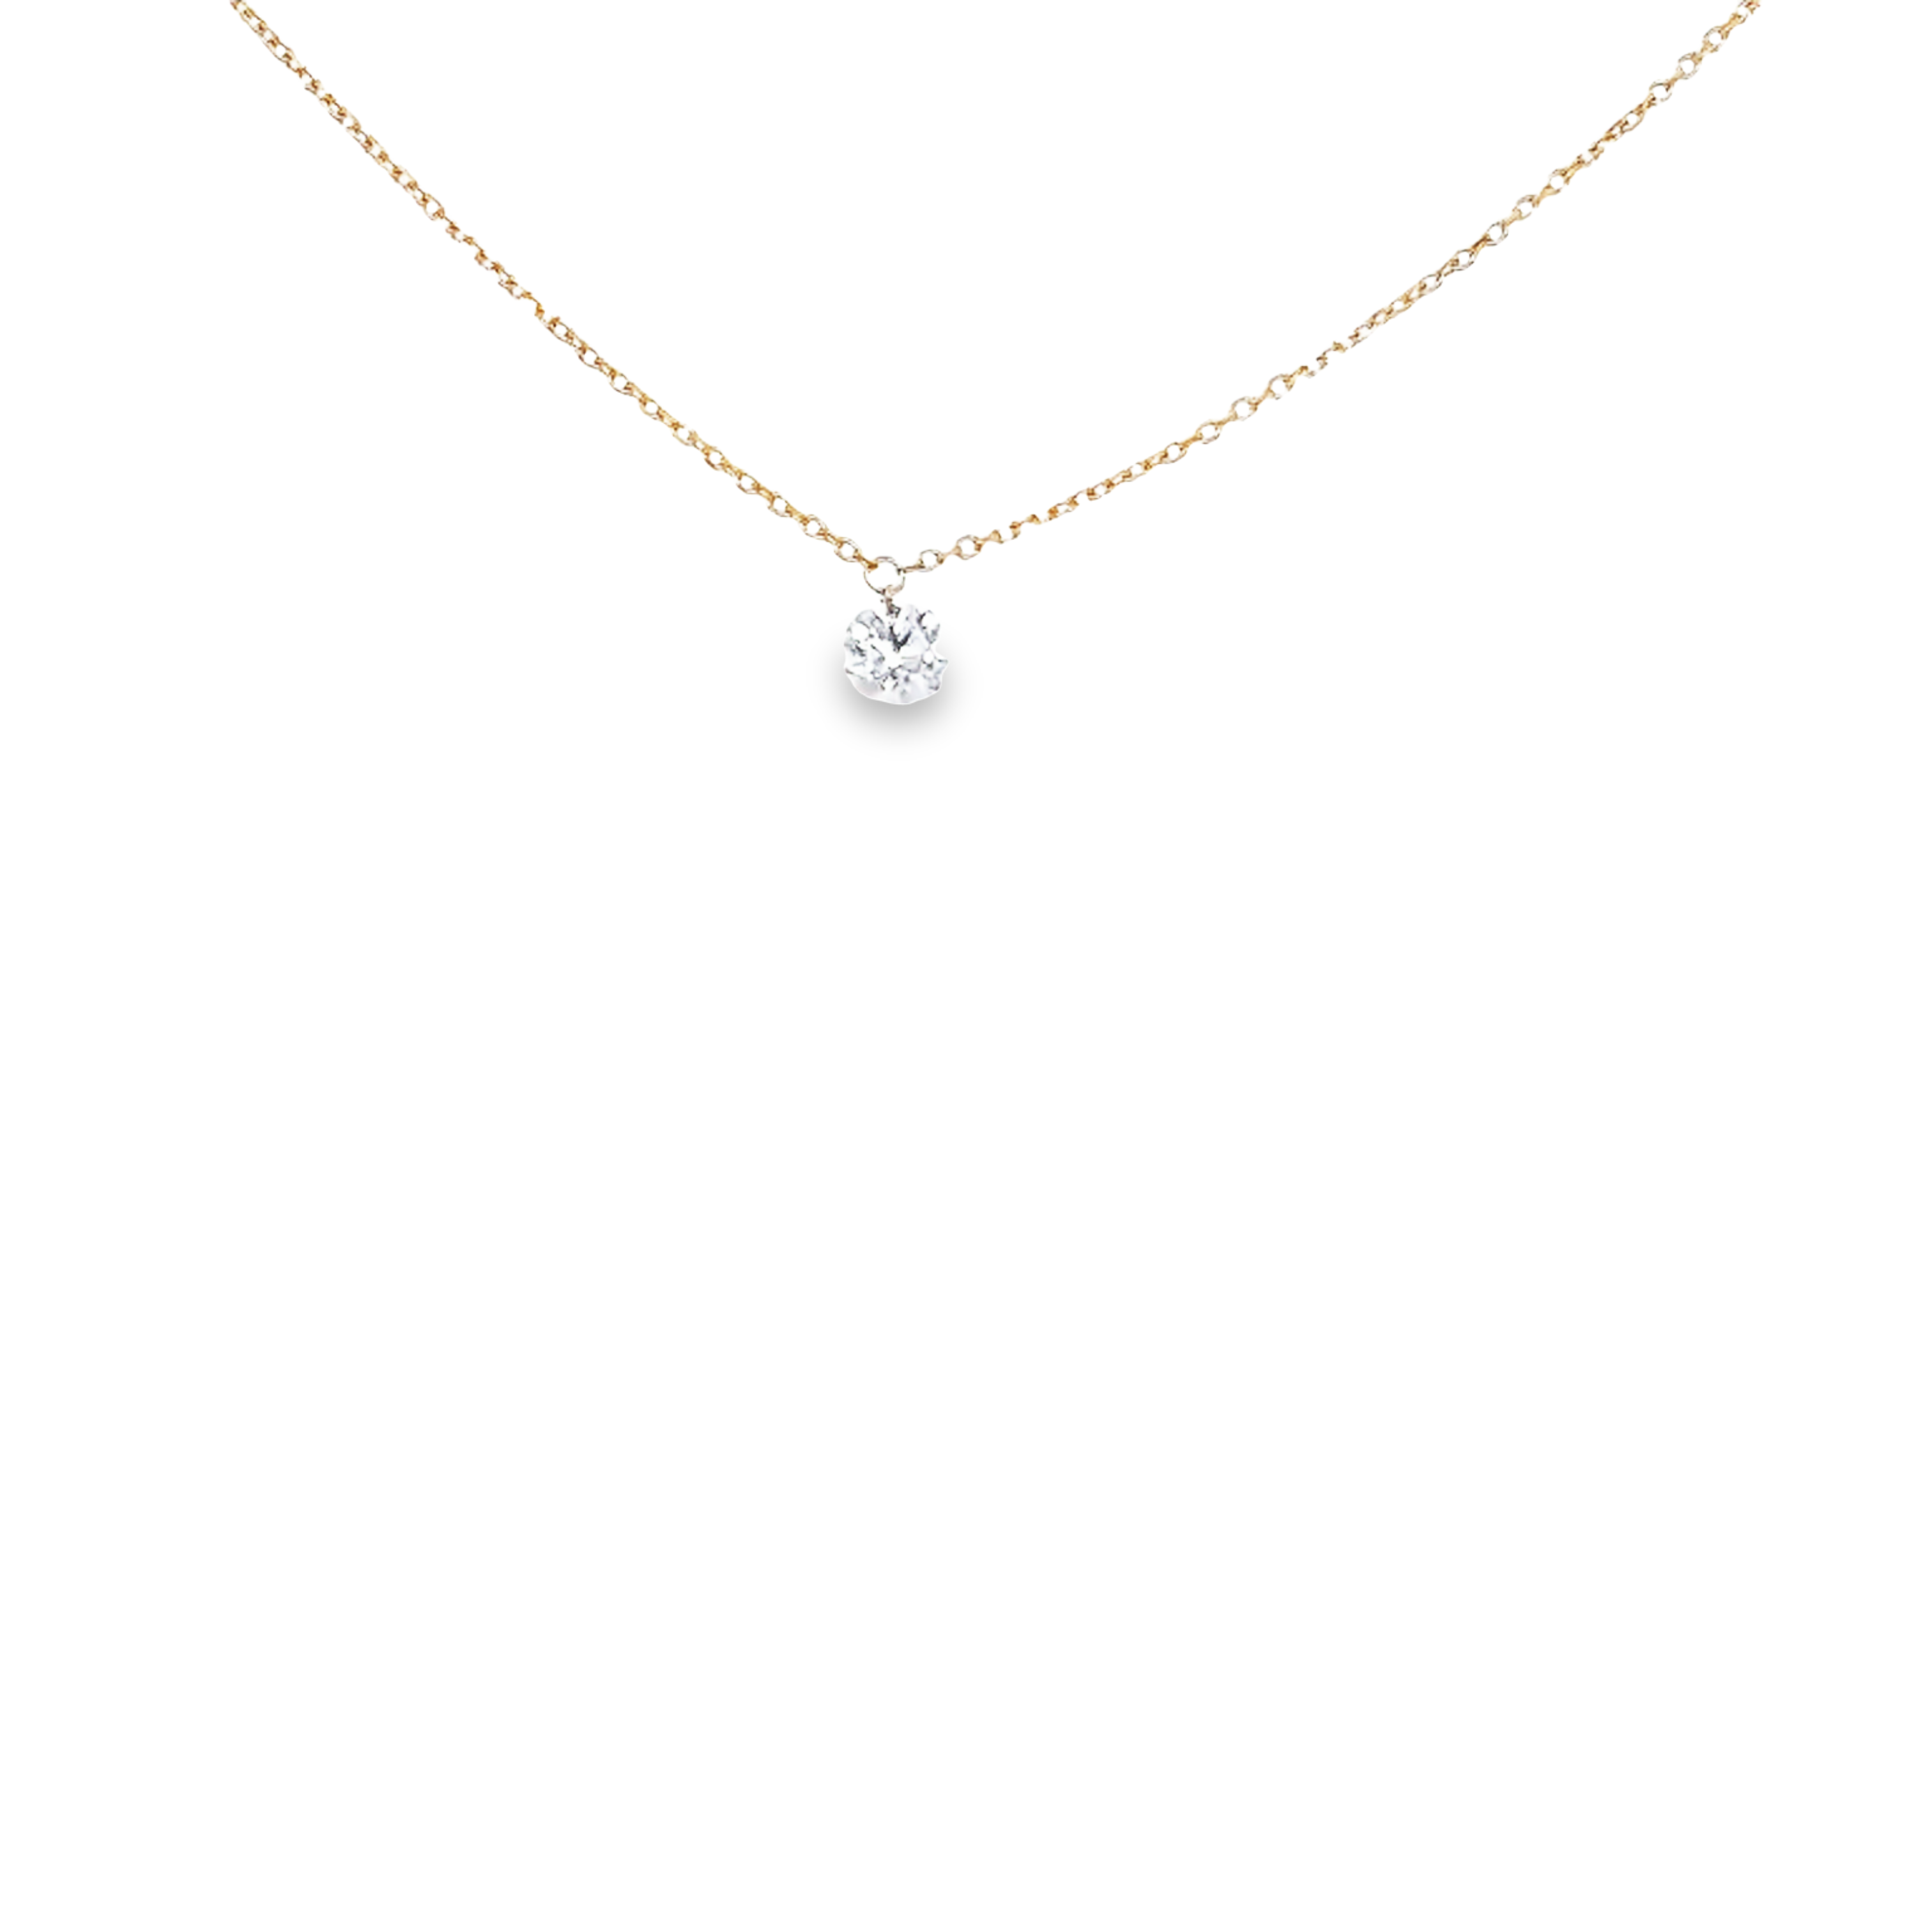 14 Karat yellow gold solitaire necklace with One 0.15Ct Round Brilliant G I Diamond